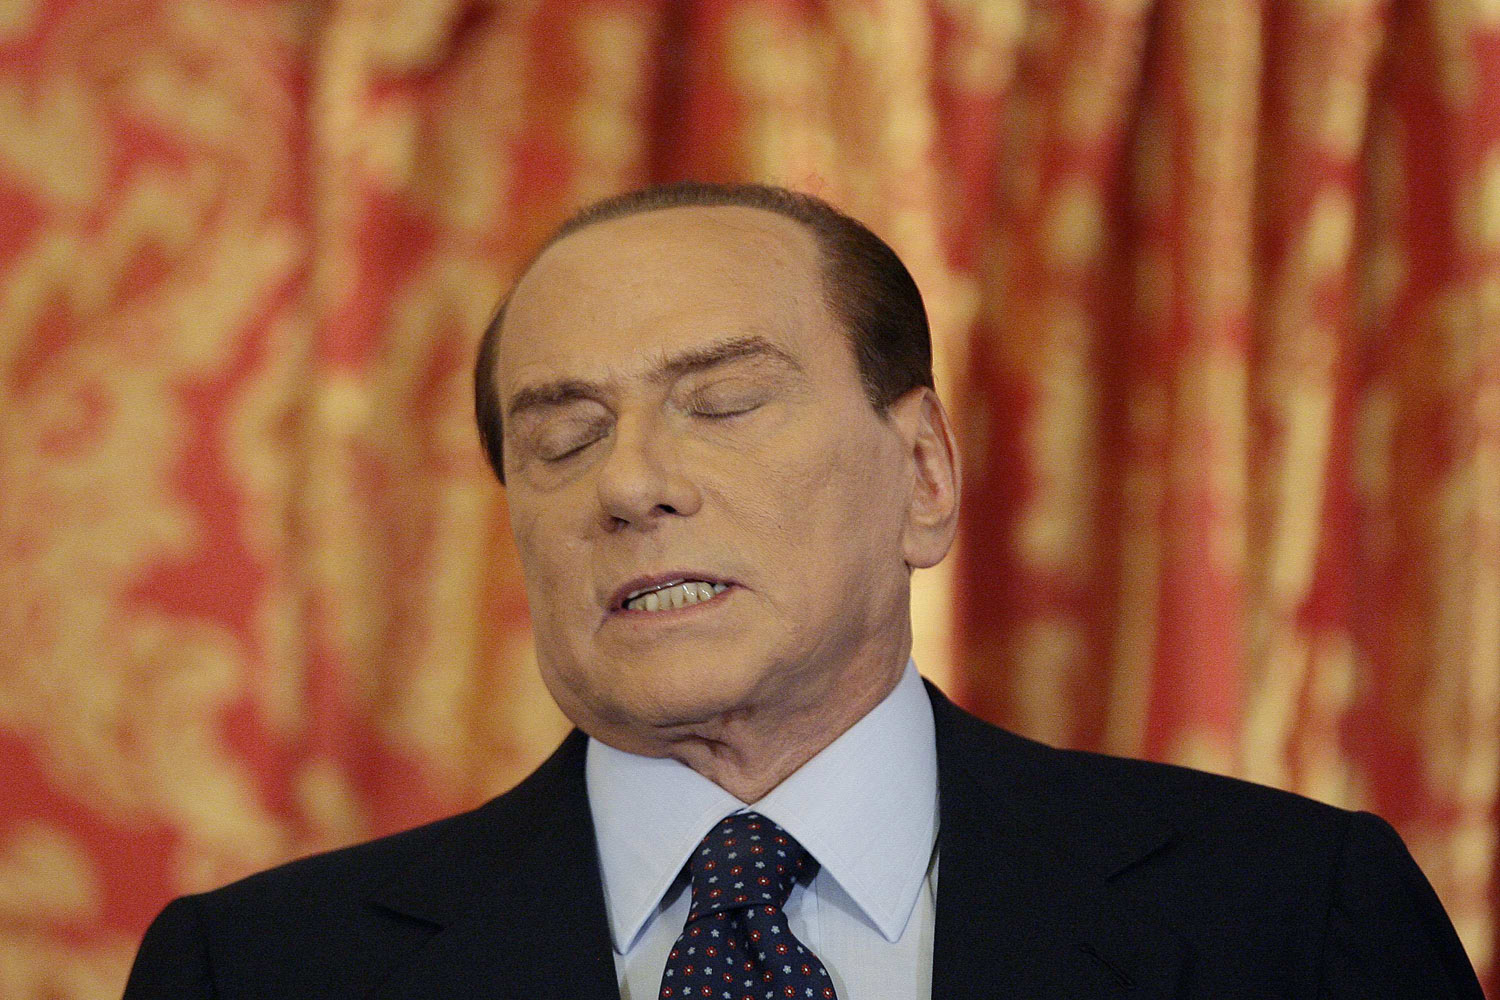 Image: Oct. 27, 2012. Italy's former Prime Minister Silvio Berlusconi speaks during a news conference at Villa Gernetto near Milan. Berlusconi appeared to have done an about-face on Saturday, vowing to stay in front-line Italian politics after a Milan court sentenced him to four years in jail for tax fraud related to his media empire.